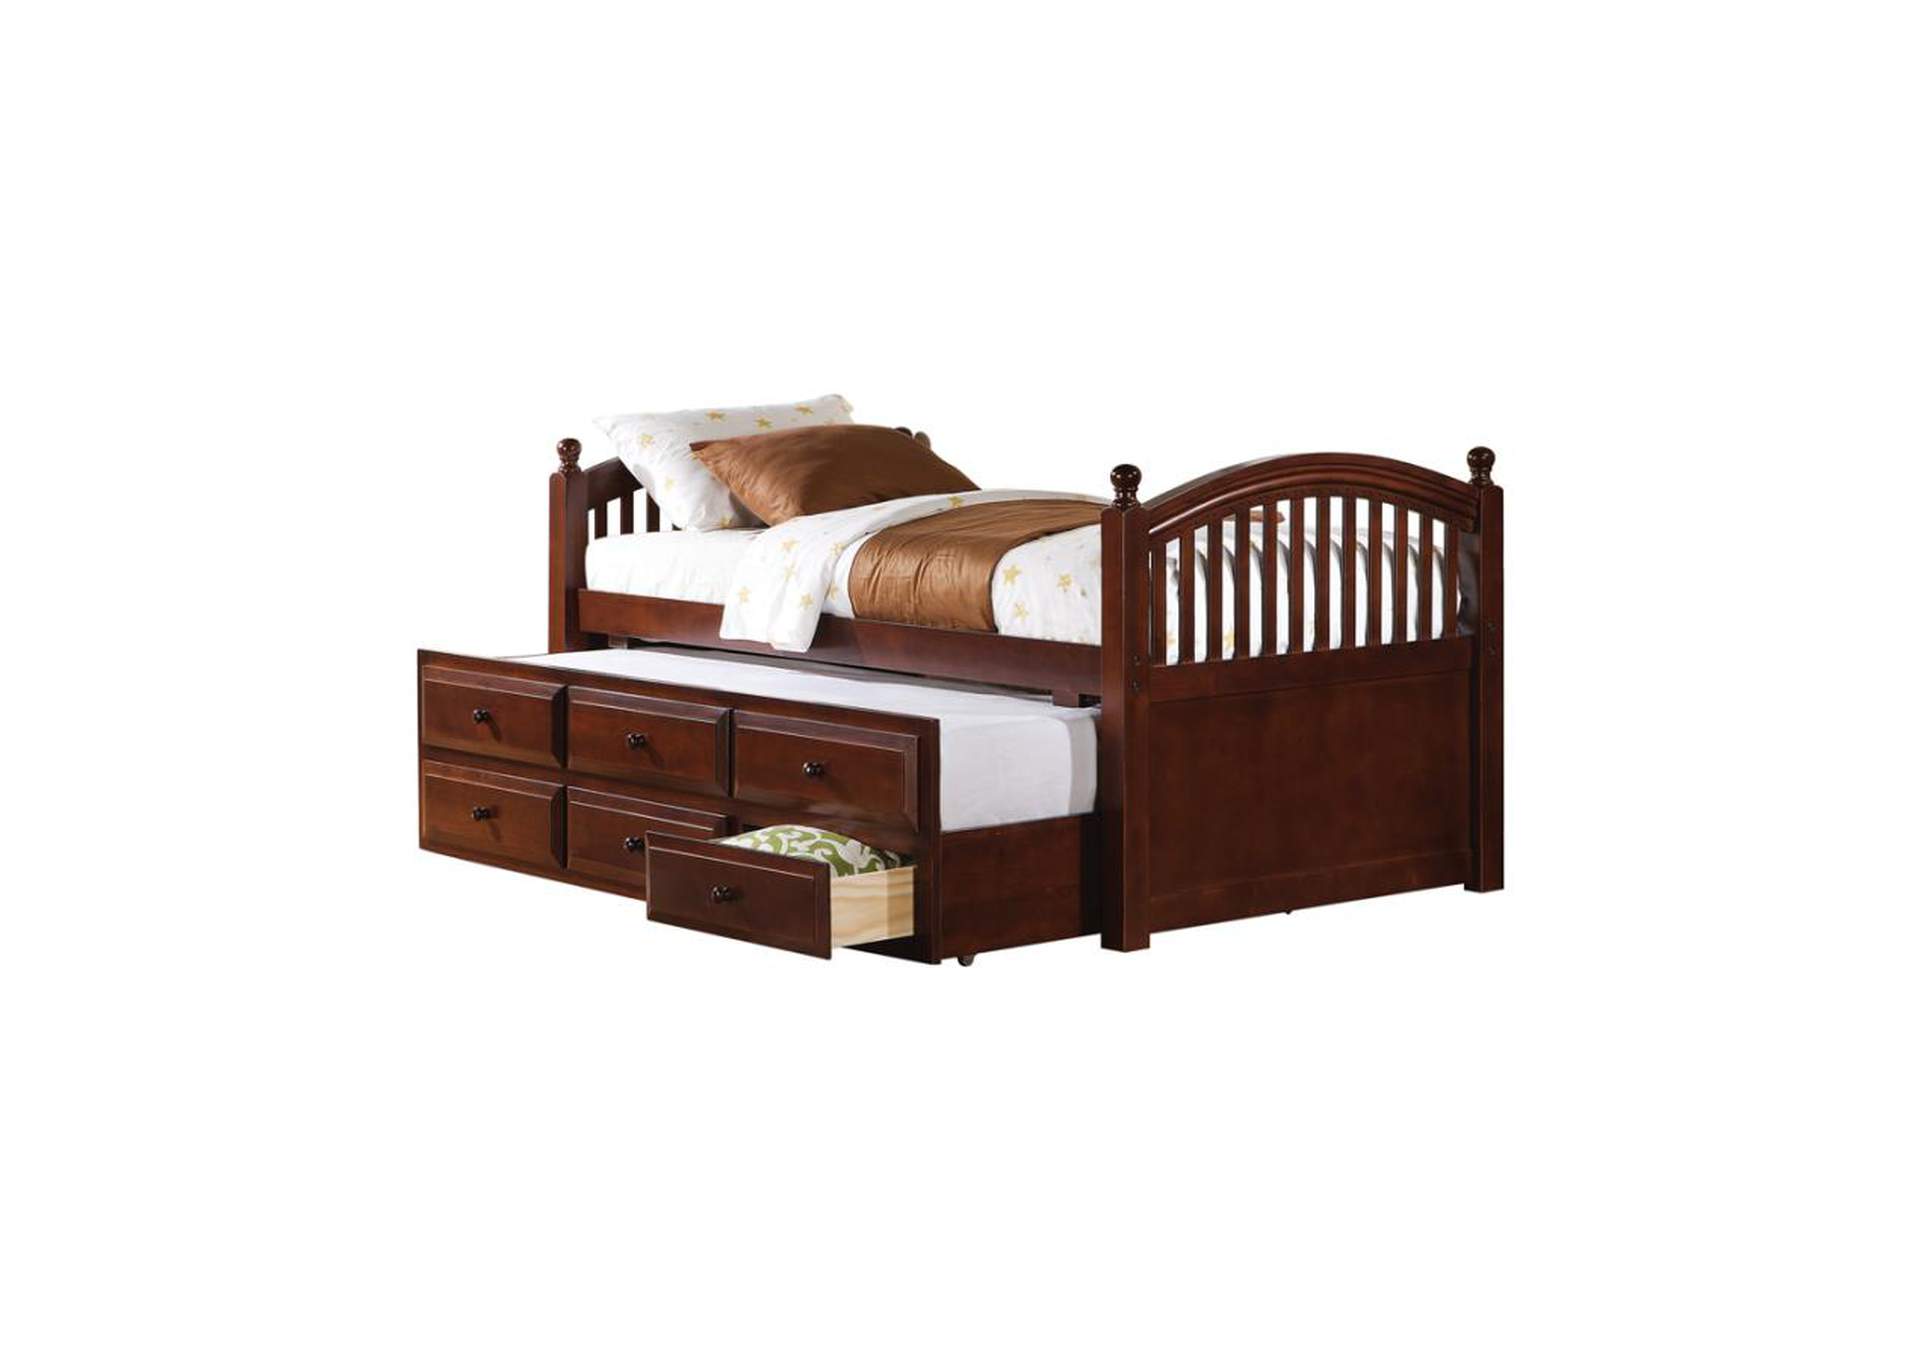 Twin Captain's Bed with Trundle and Drawers Chestnut,Coaster Furniture